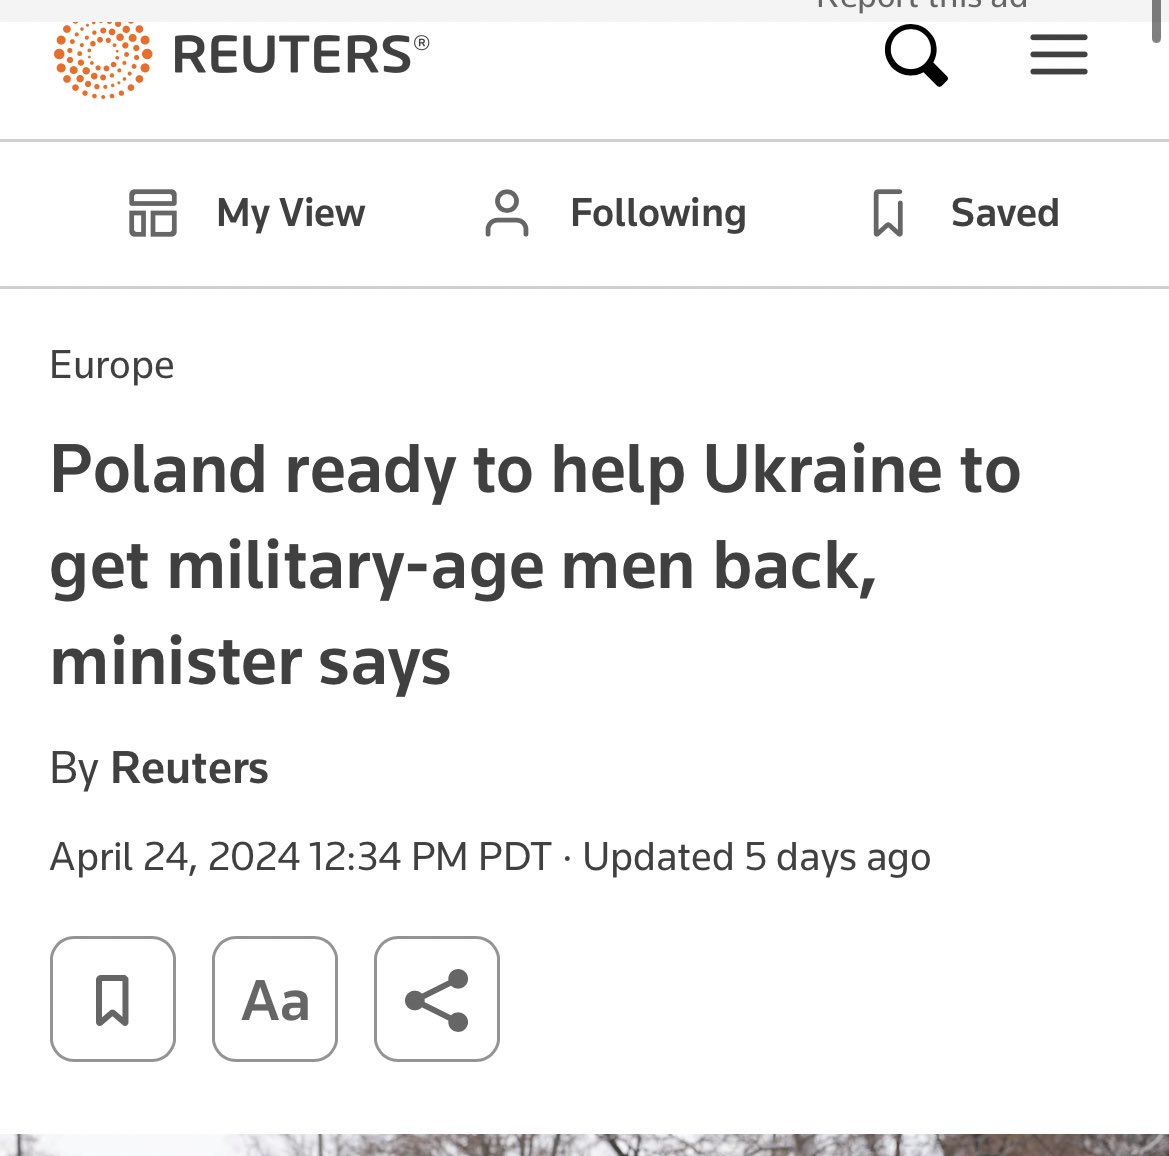 Ukrainians don’t want to fight in the war. That’s why between 500,000 and 1,000,000 men of fighting age left for other countries. Thanks to Speaker Johnson and other demon worshippers, these men will be kidnapped and sent back to die.